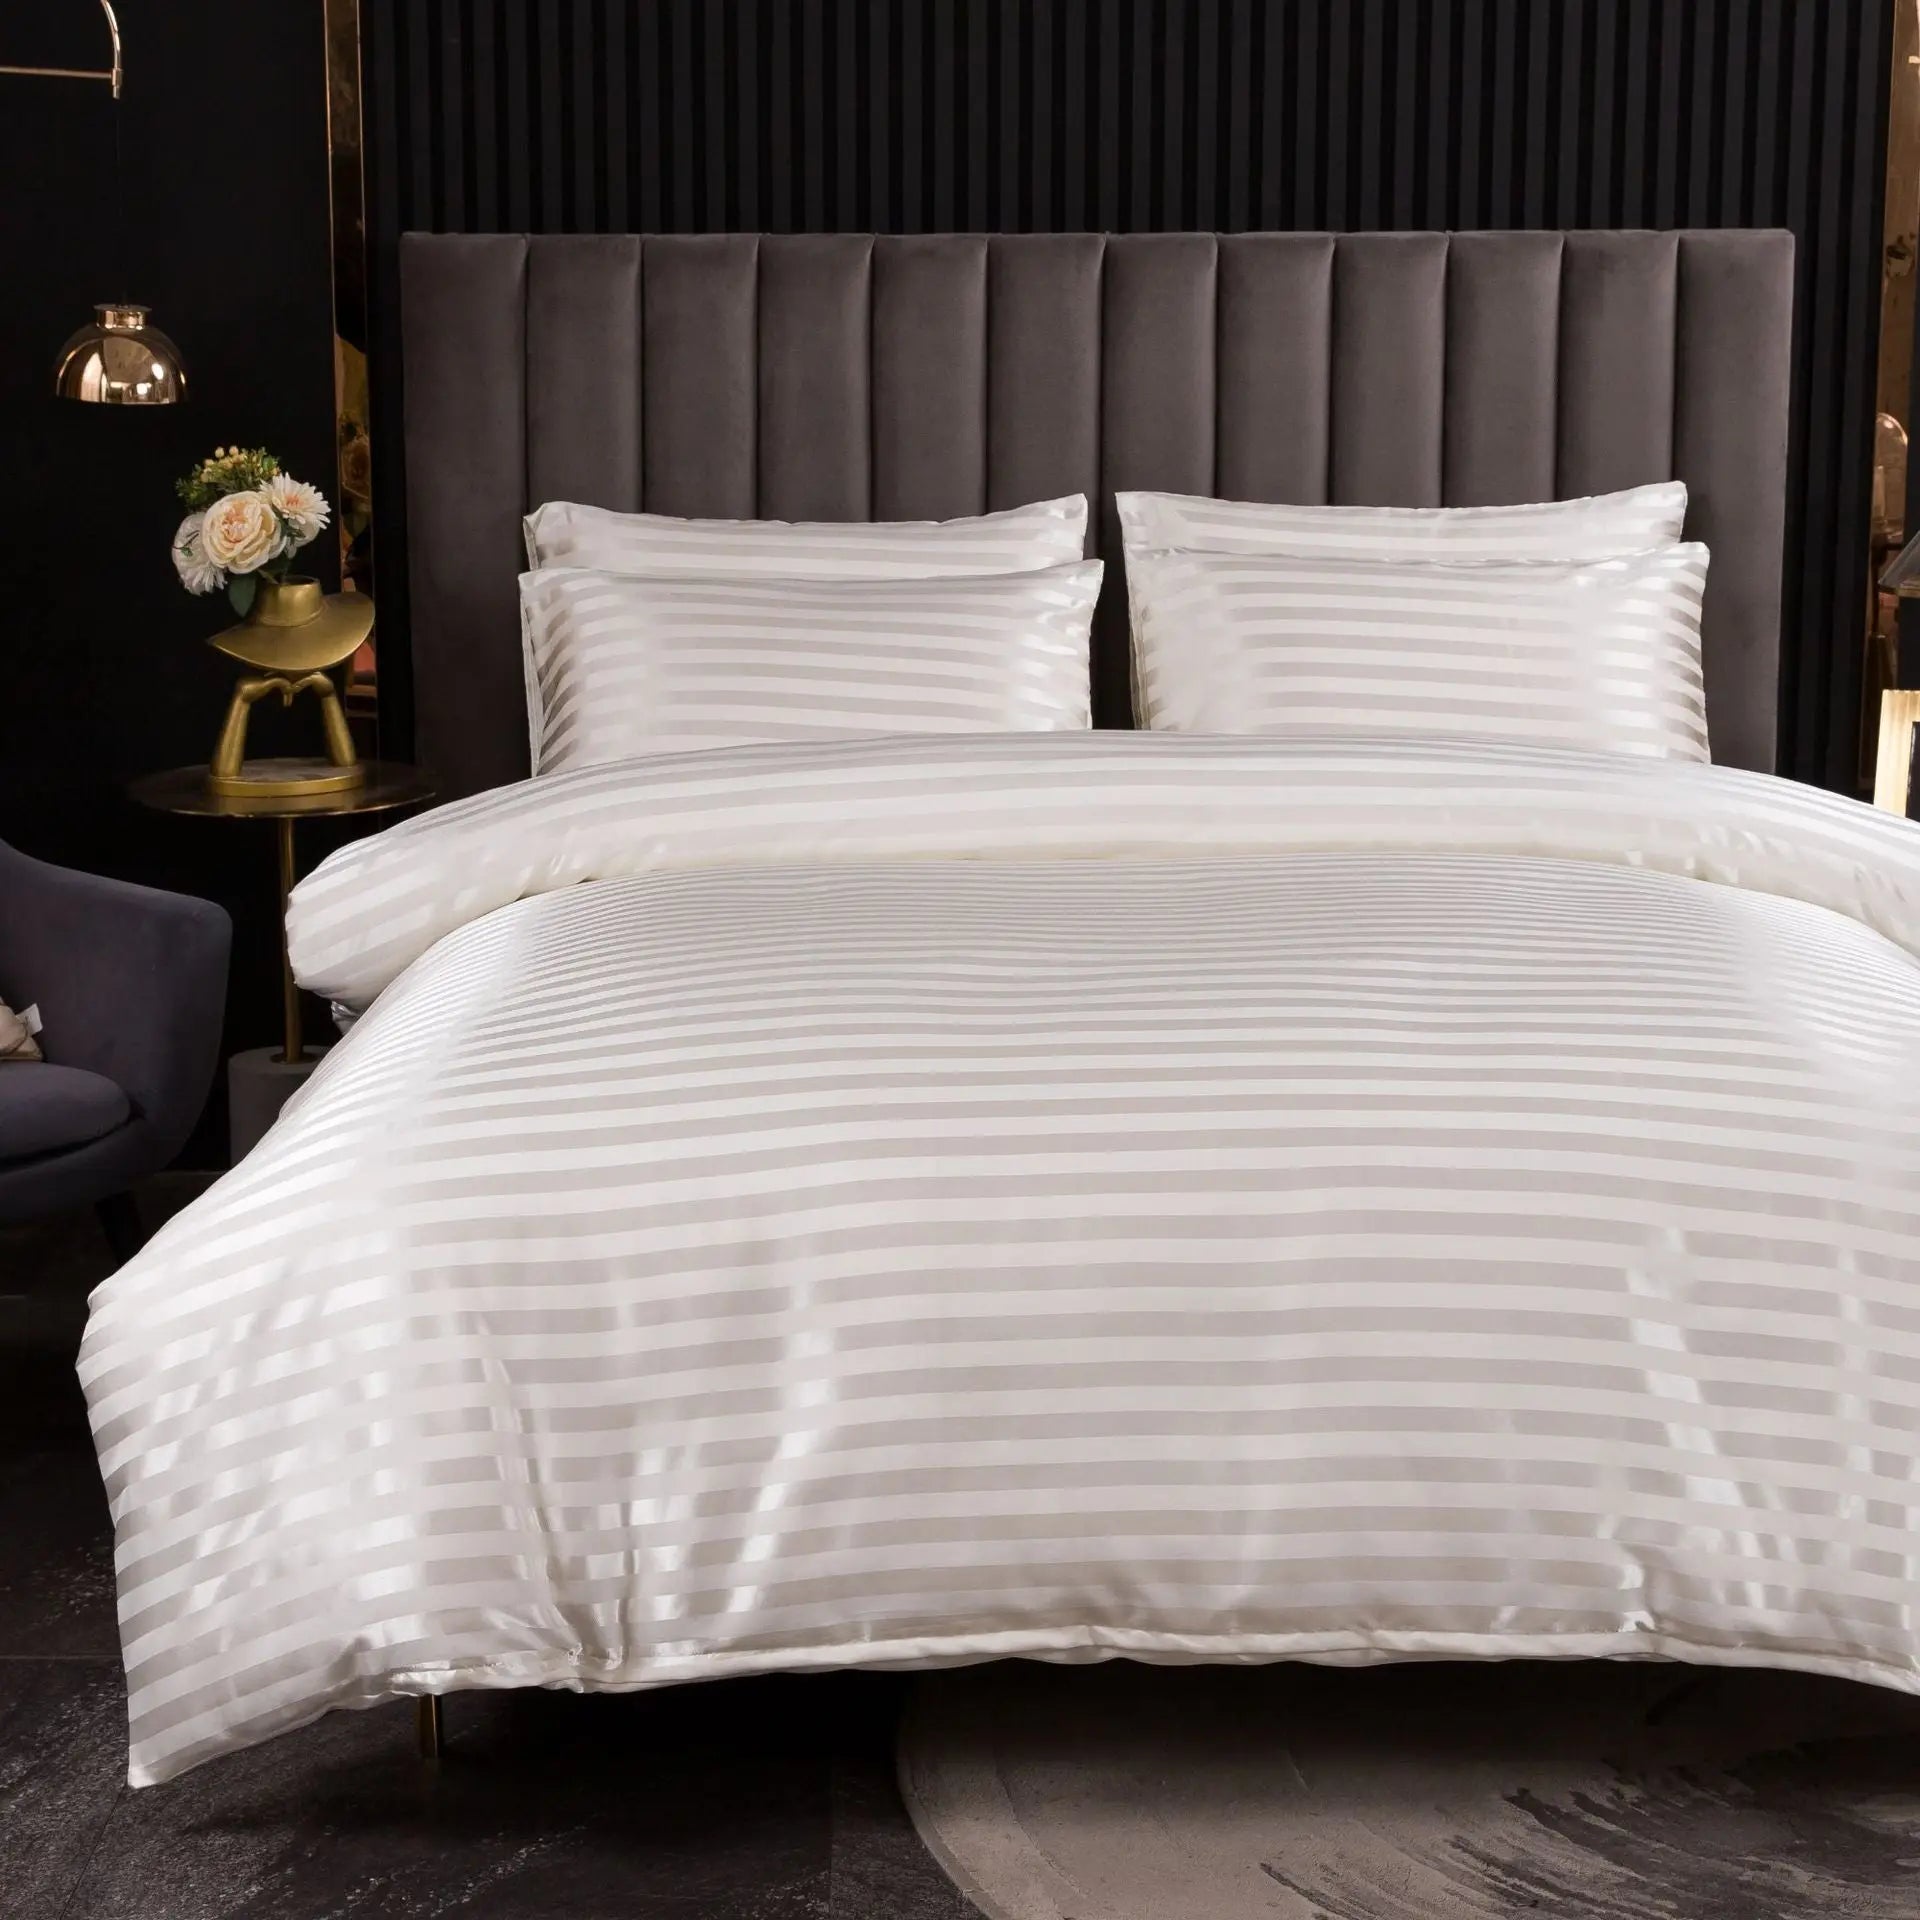 Thickened Duvet Cover Bed Sheet cjdropshipping